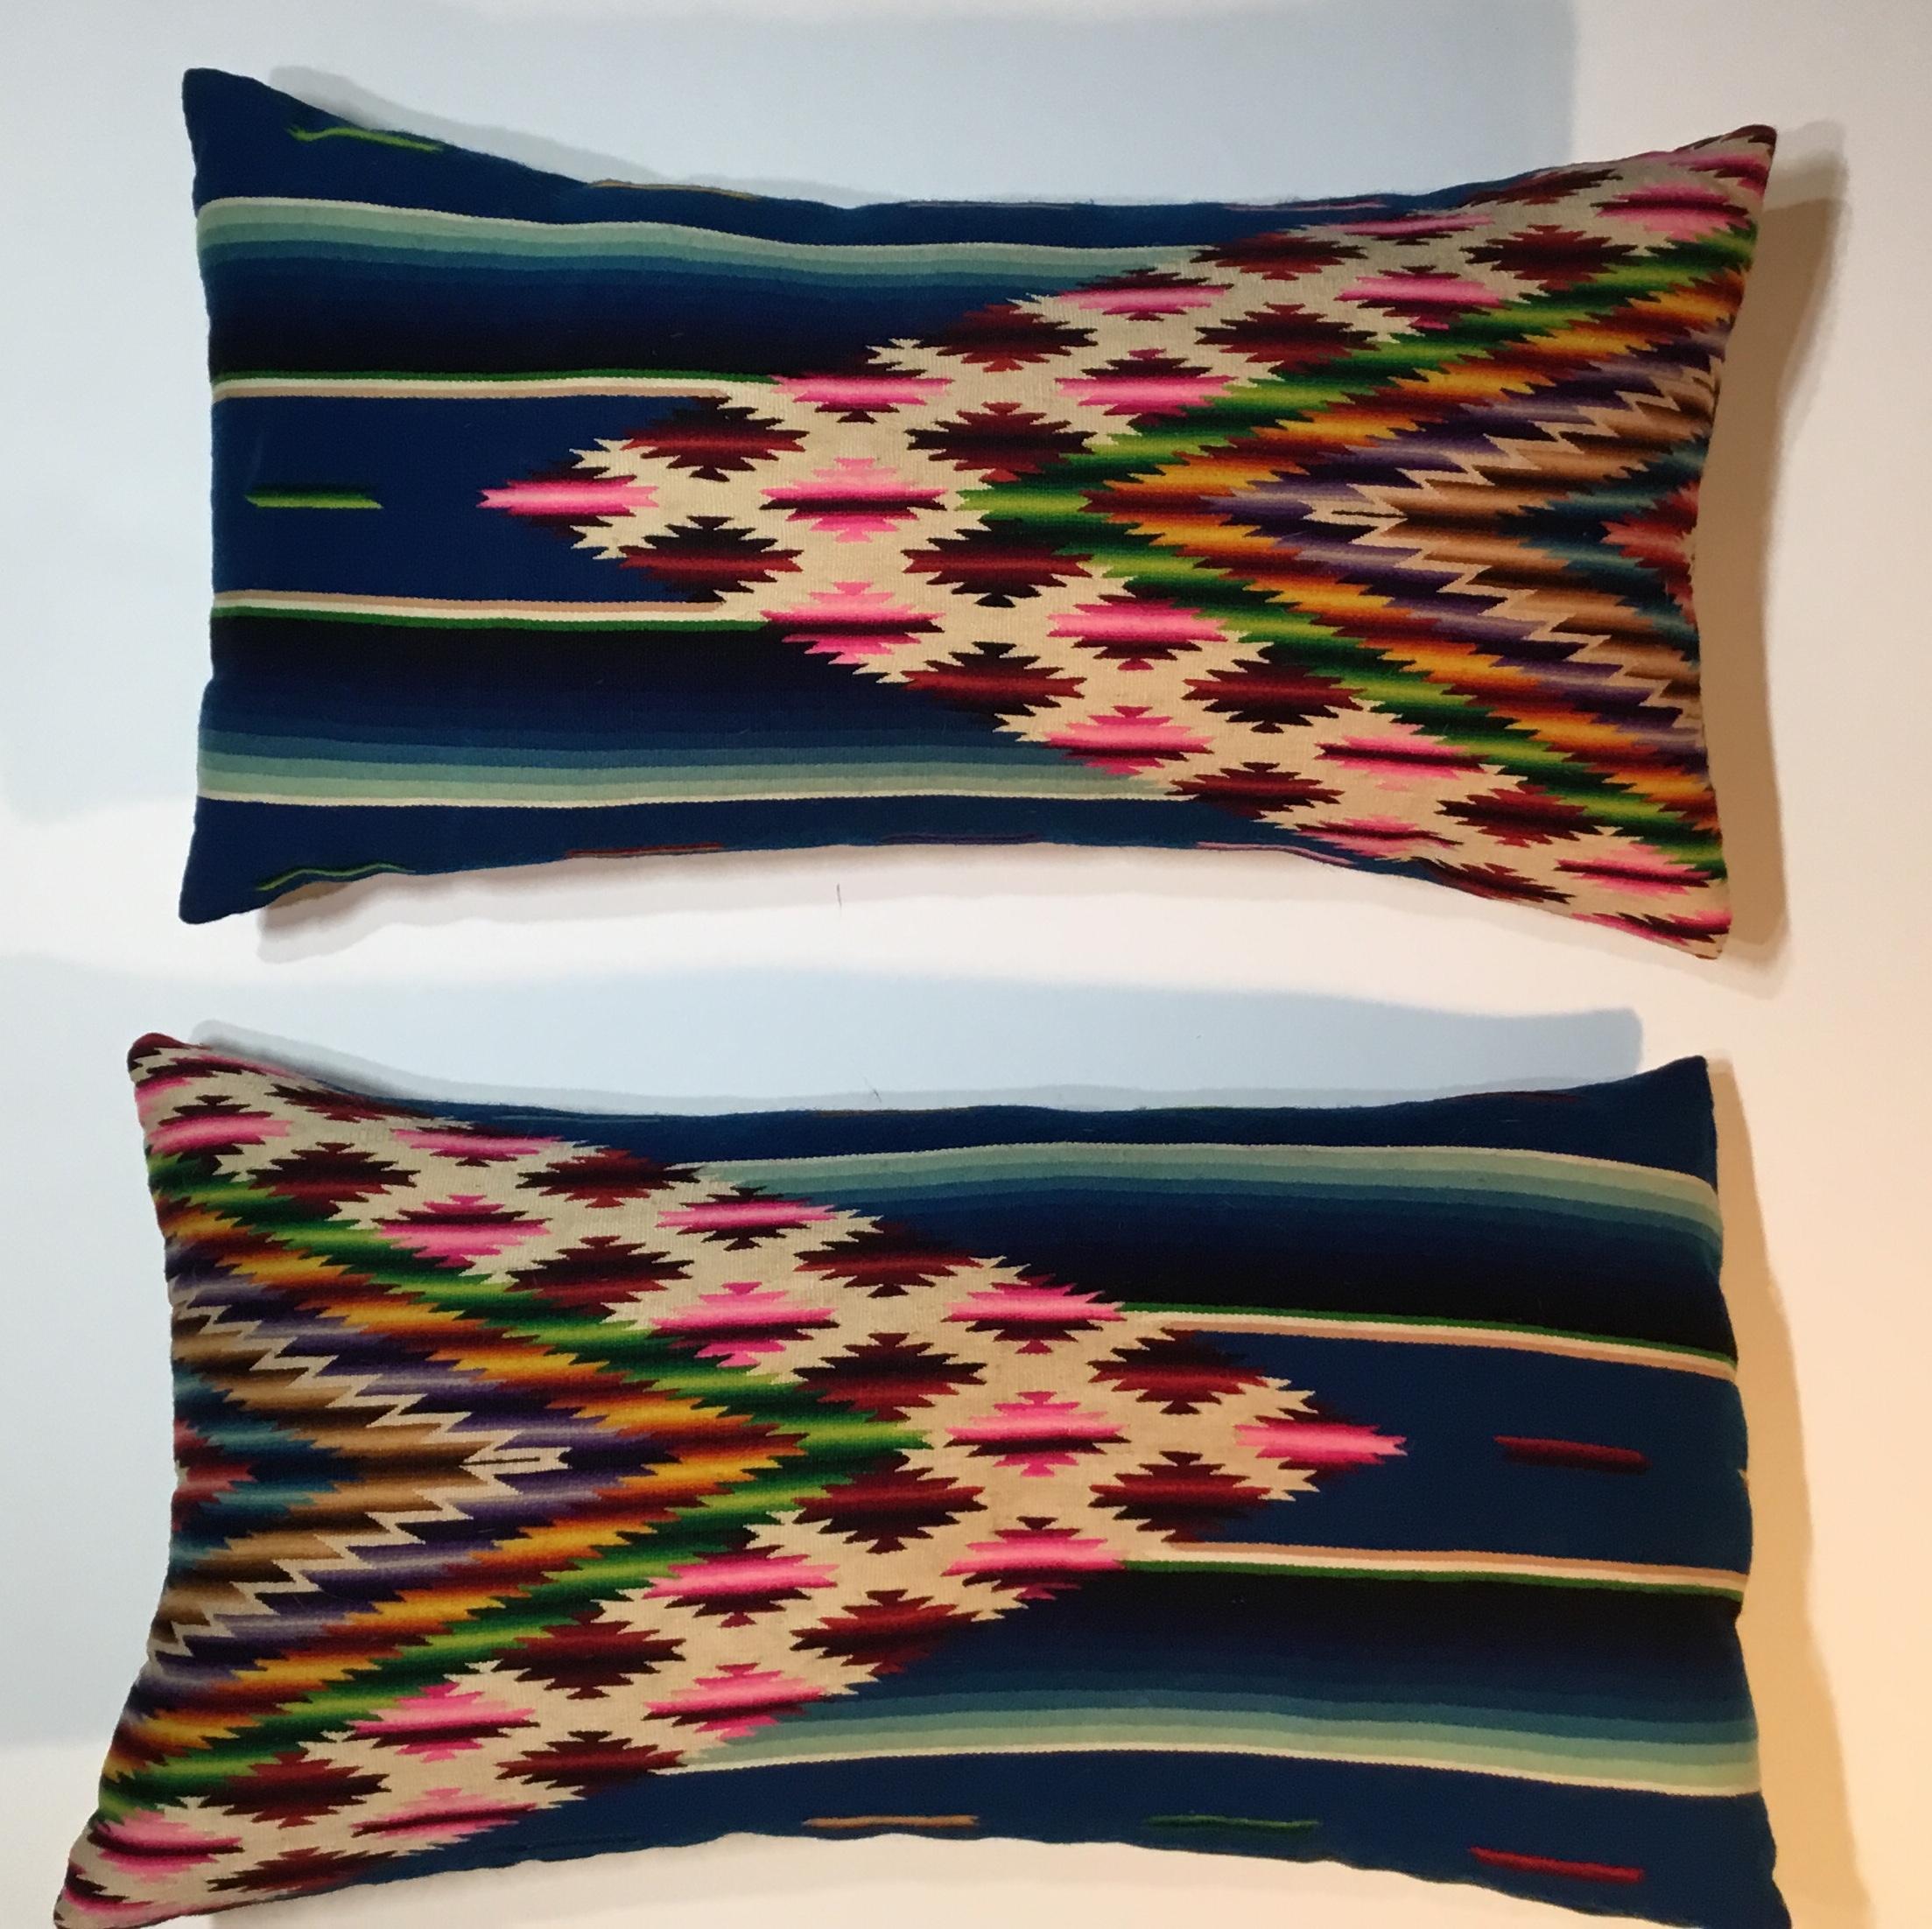 Beautiful pair of pillows made of finely handwoven multi-color vintage Saltillo Mexican blanket.
Originally this price used as wall tapestry and we decided to make pillows from it .the pillows are made with the woven textile back and front ,with